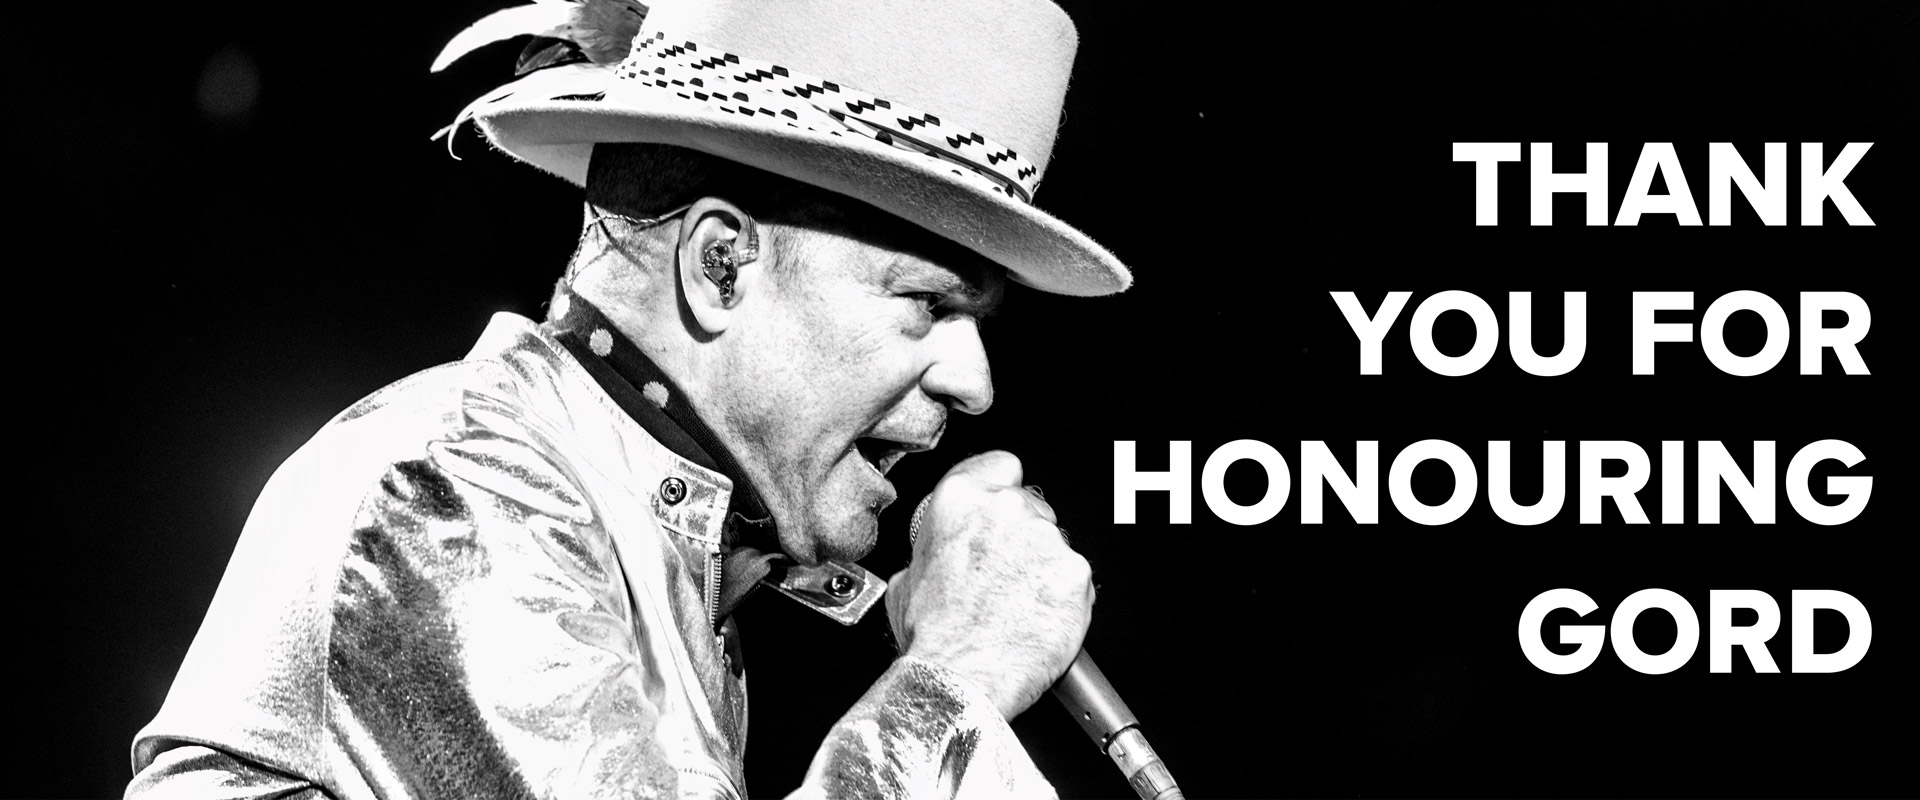 Gord Downie - Thank you for honoring Gord